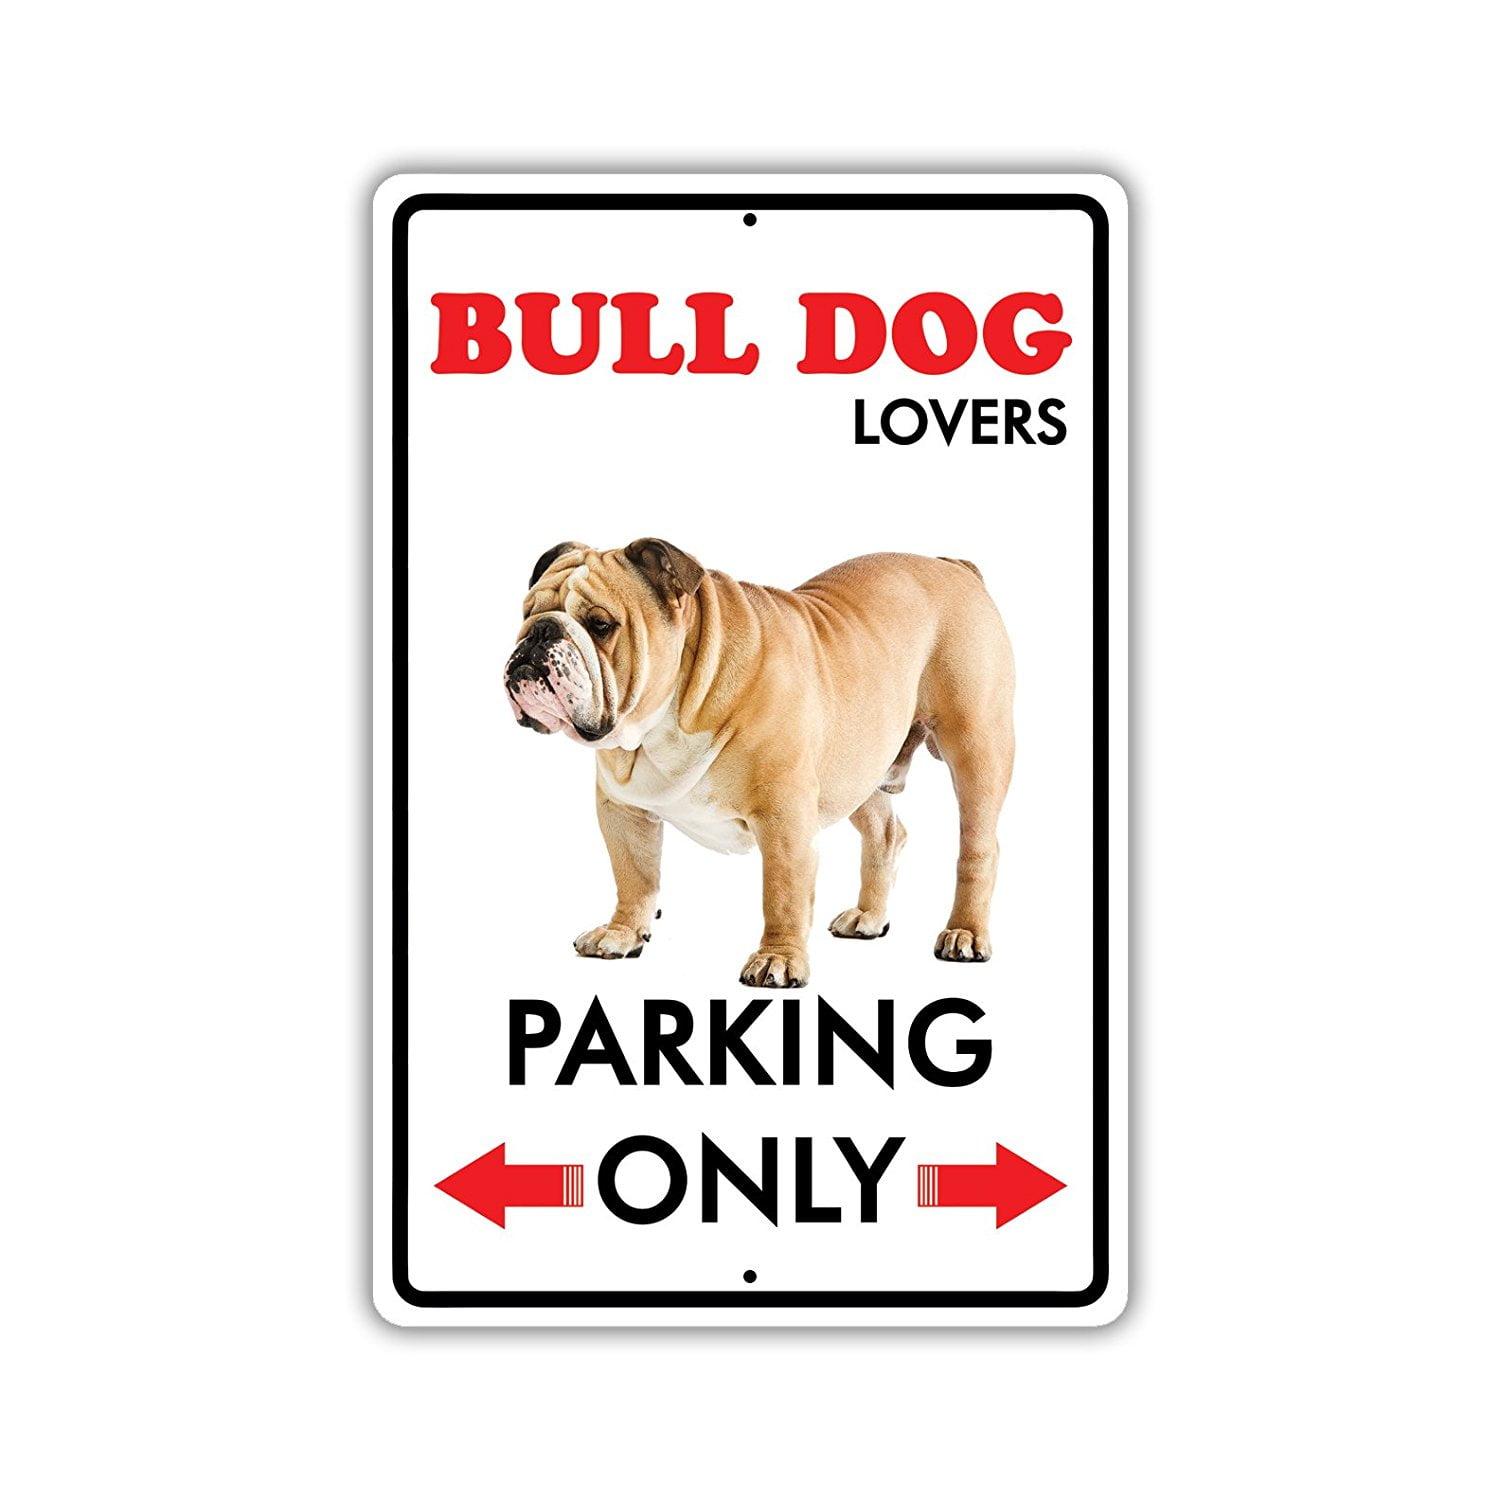 Warning Area Patrolled By Pug Novelty Funny Metal Sign 8 in x 12 in 